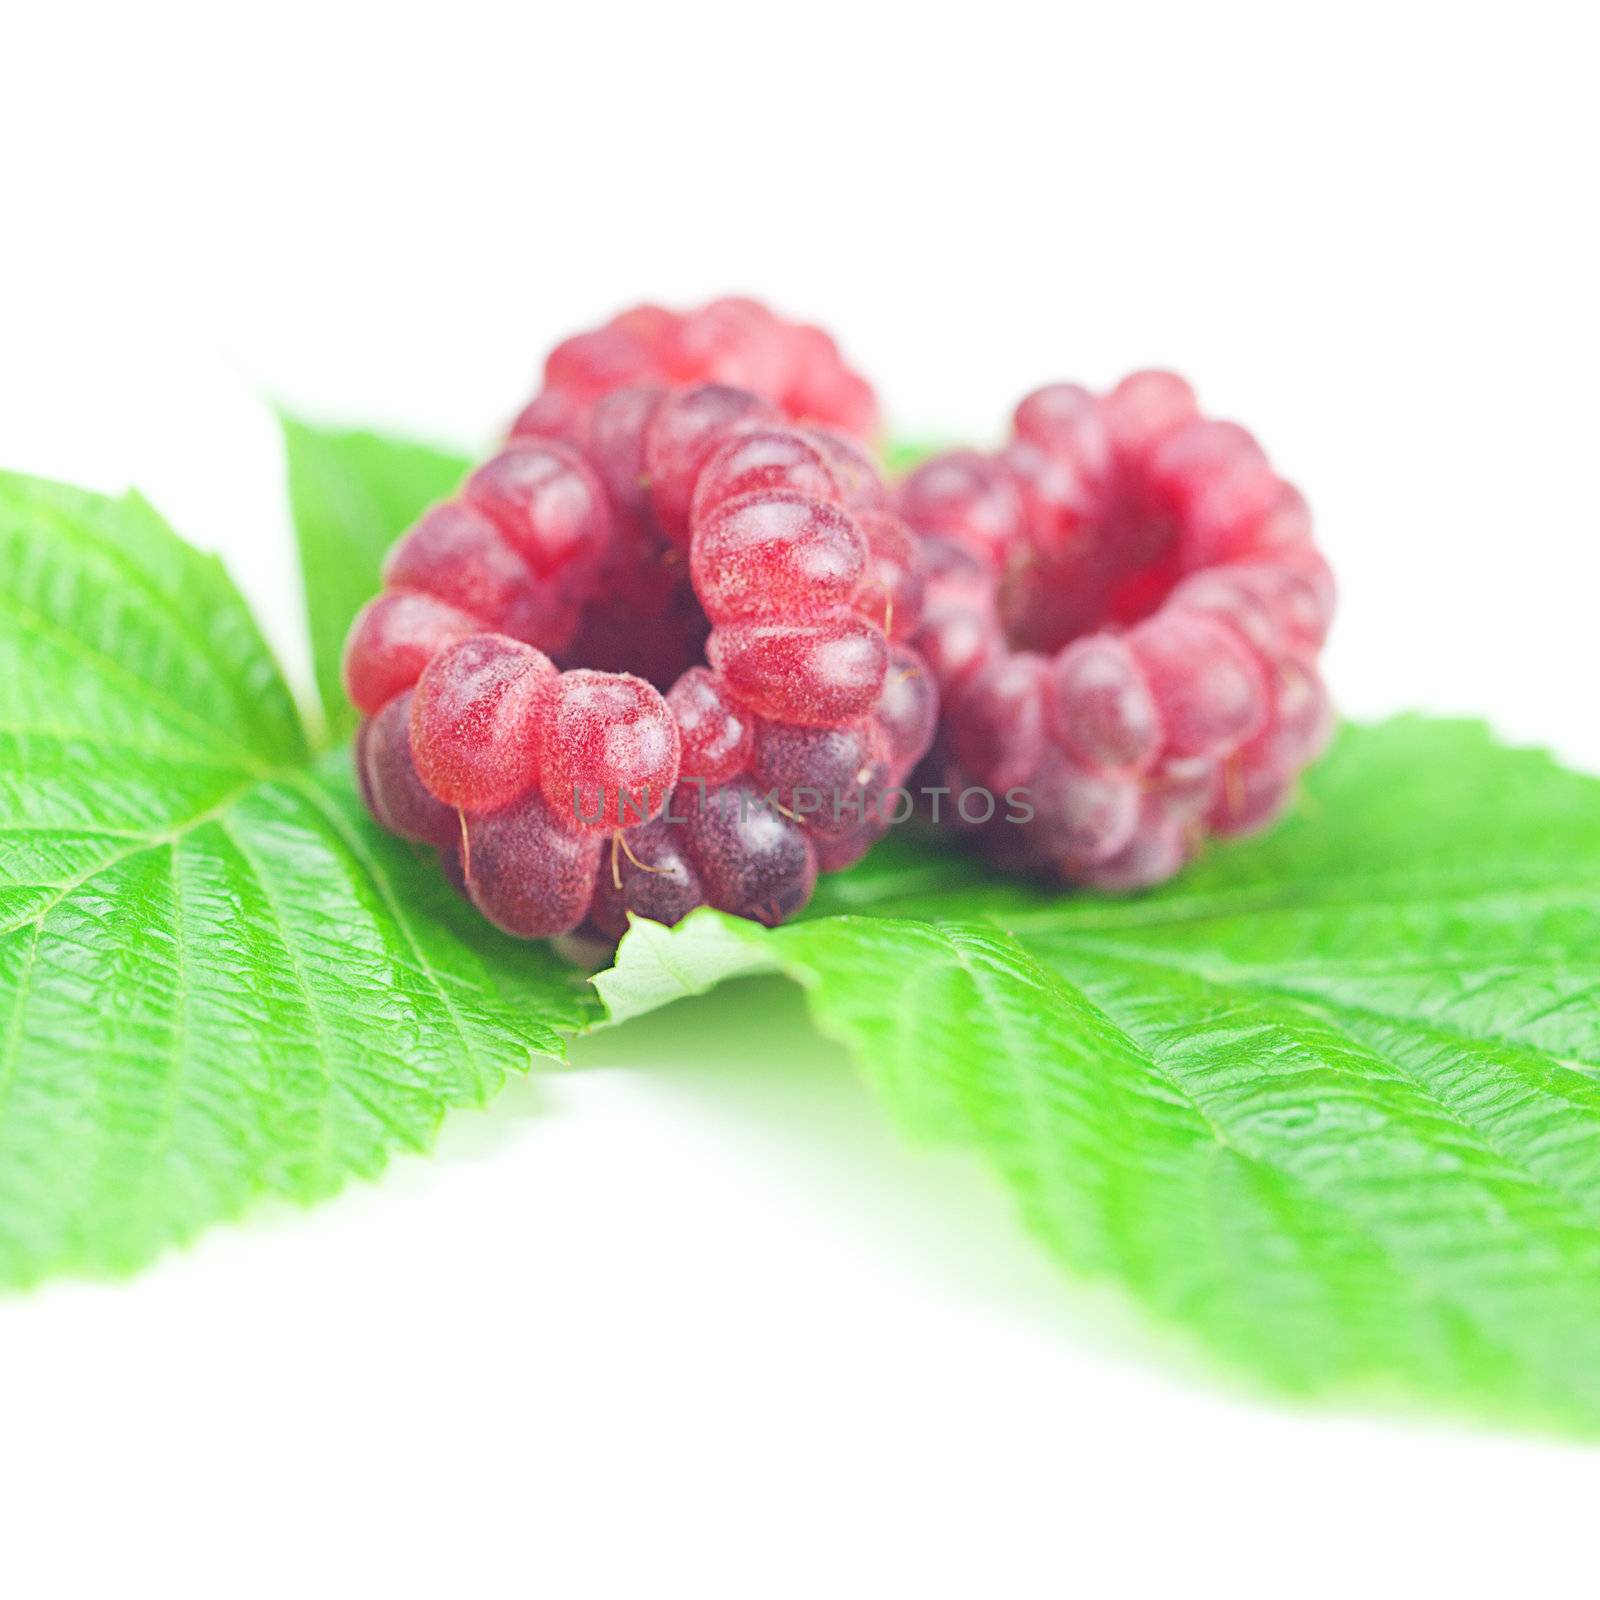 Raspberries and green leaves on white background by jannyjus